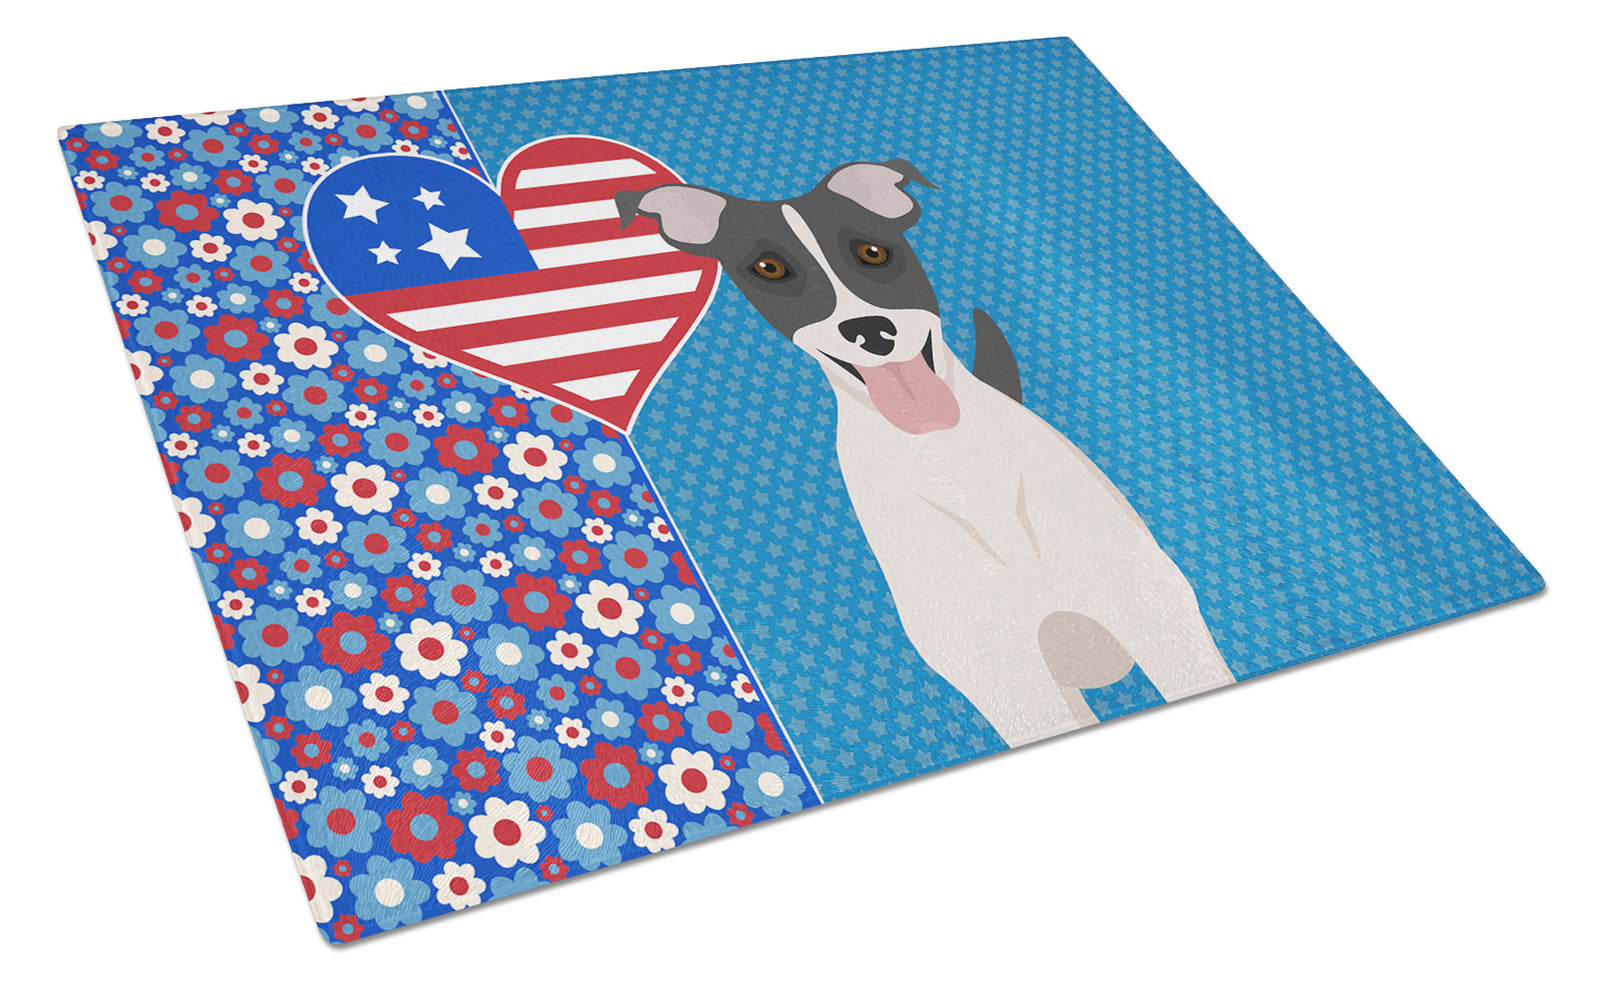 Buy this Black White Smooth Jack Russell Terrier USA American Glass Cutting Board Large